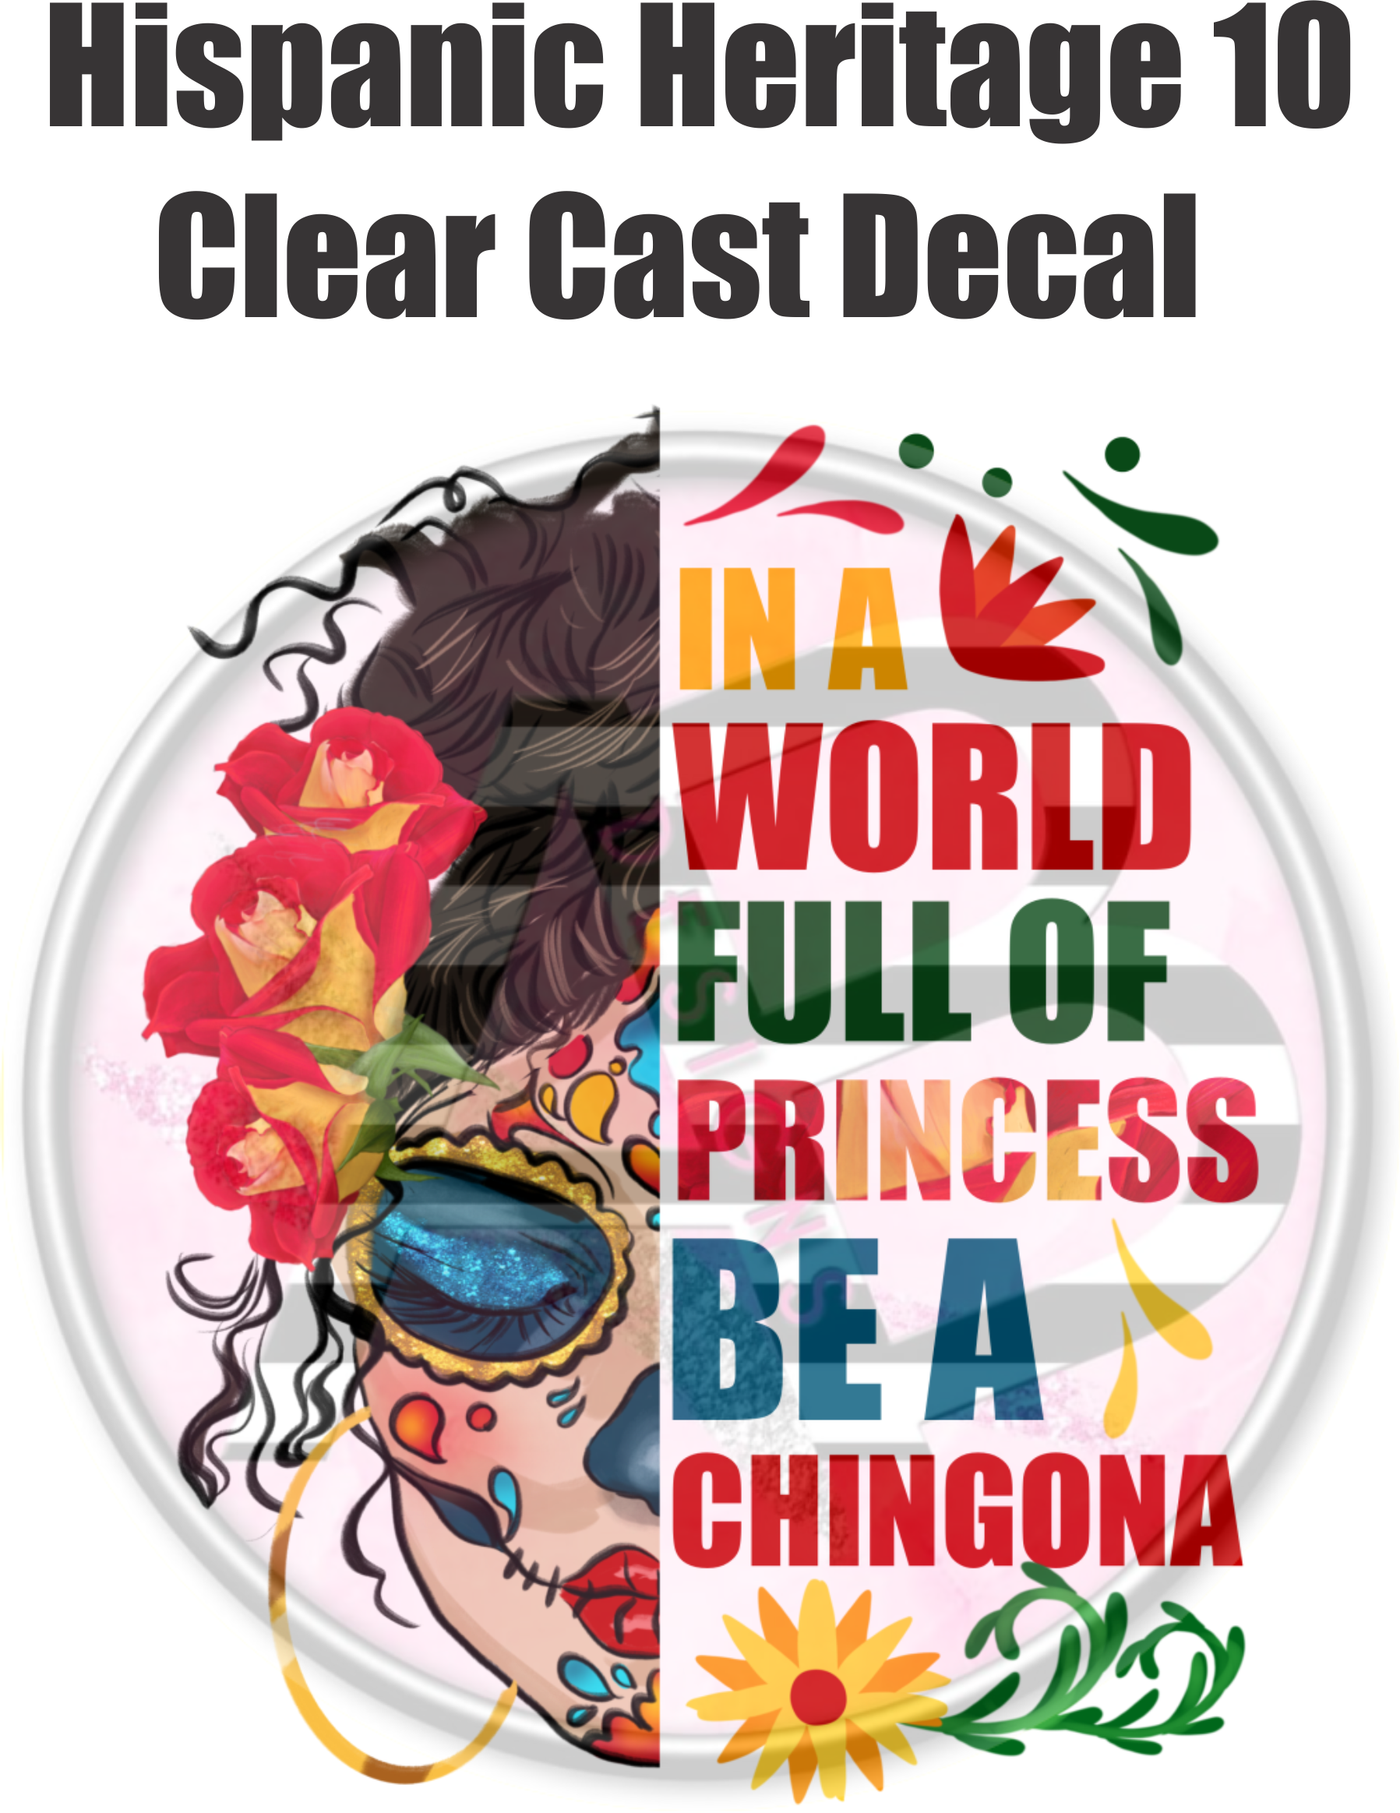 Hispanic Heritage 10 - Clear Cast Decal